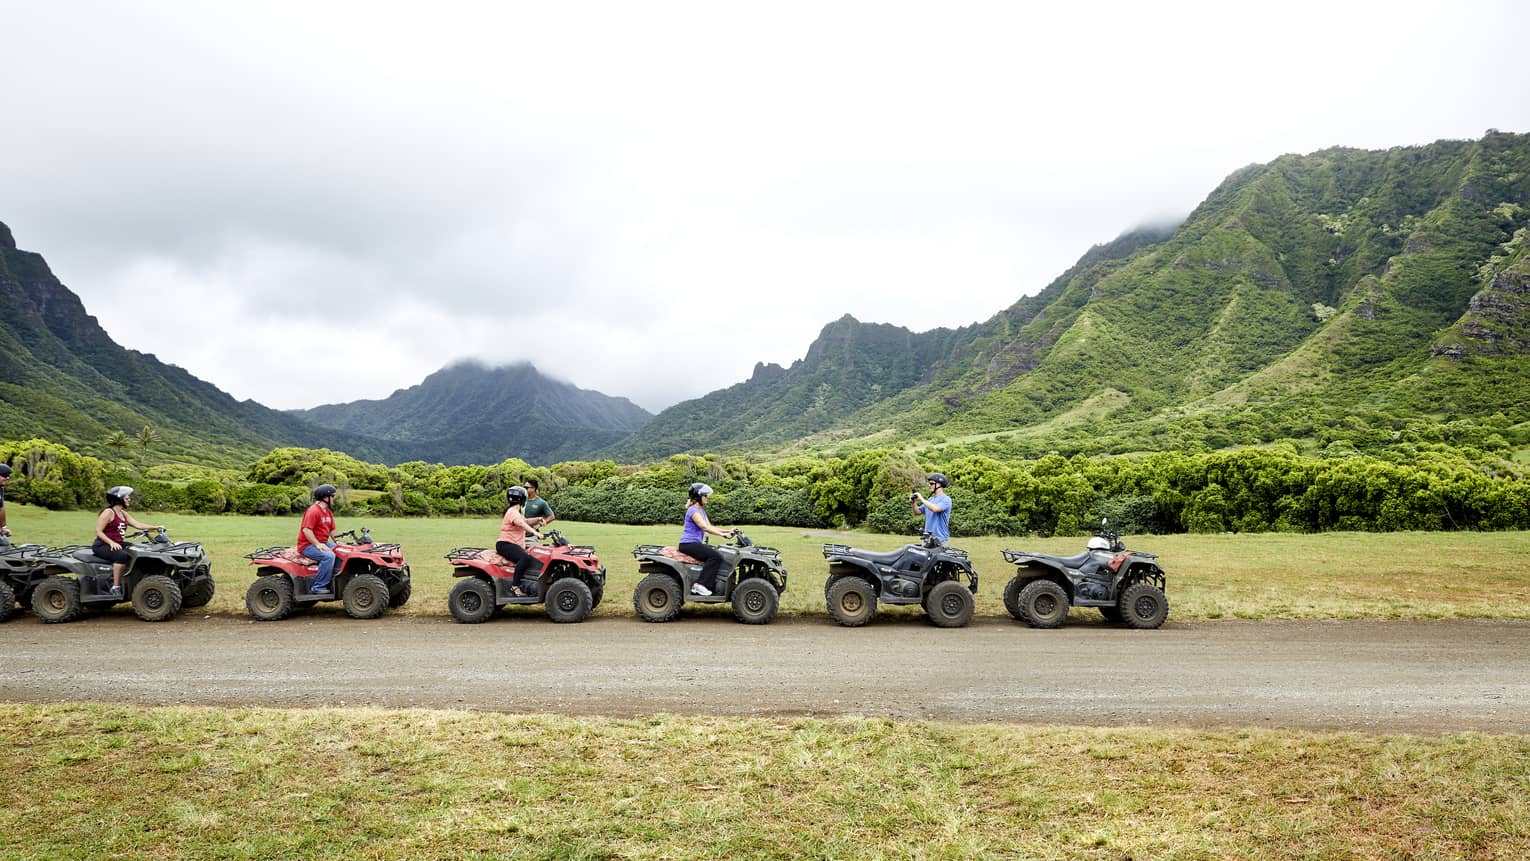 A group of ATV riders in black helmets pull over on a dirt road. Behind them, a lush valley amid misty forested mountains.